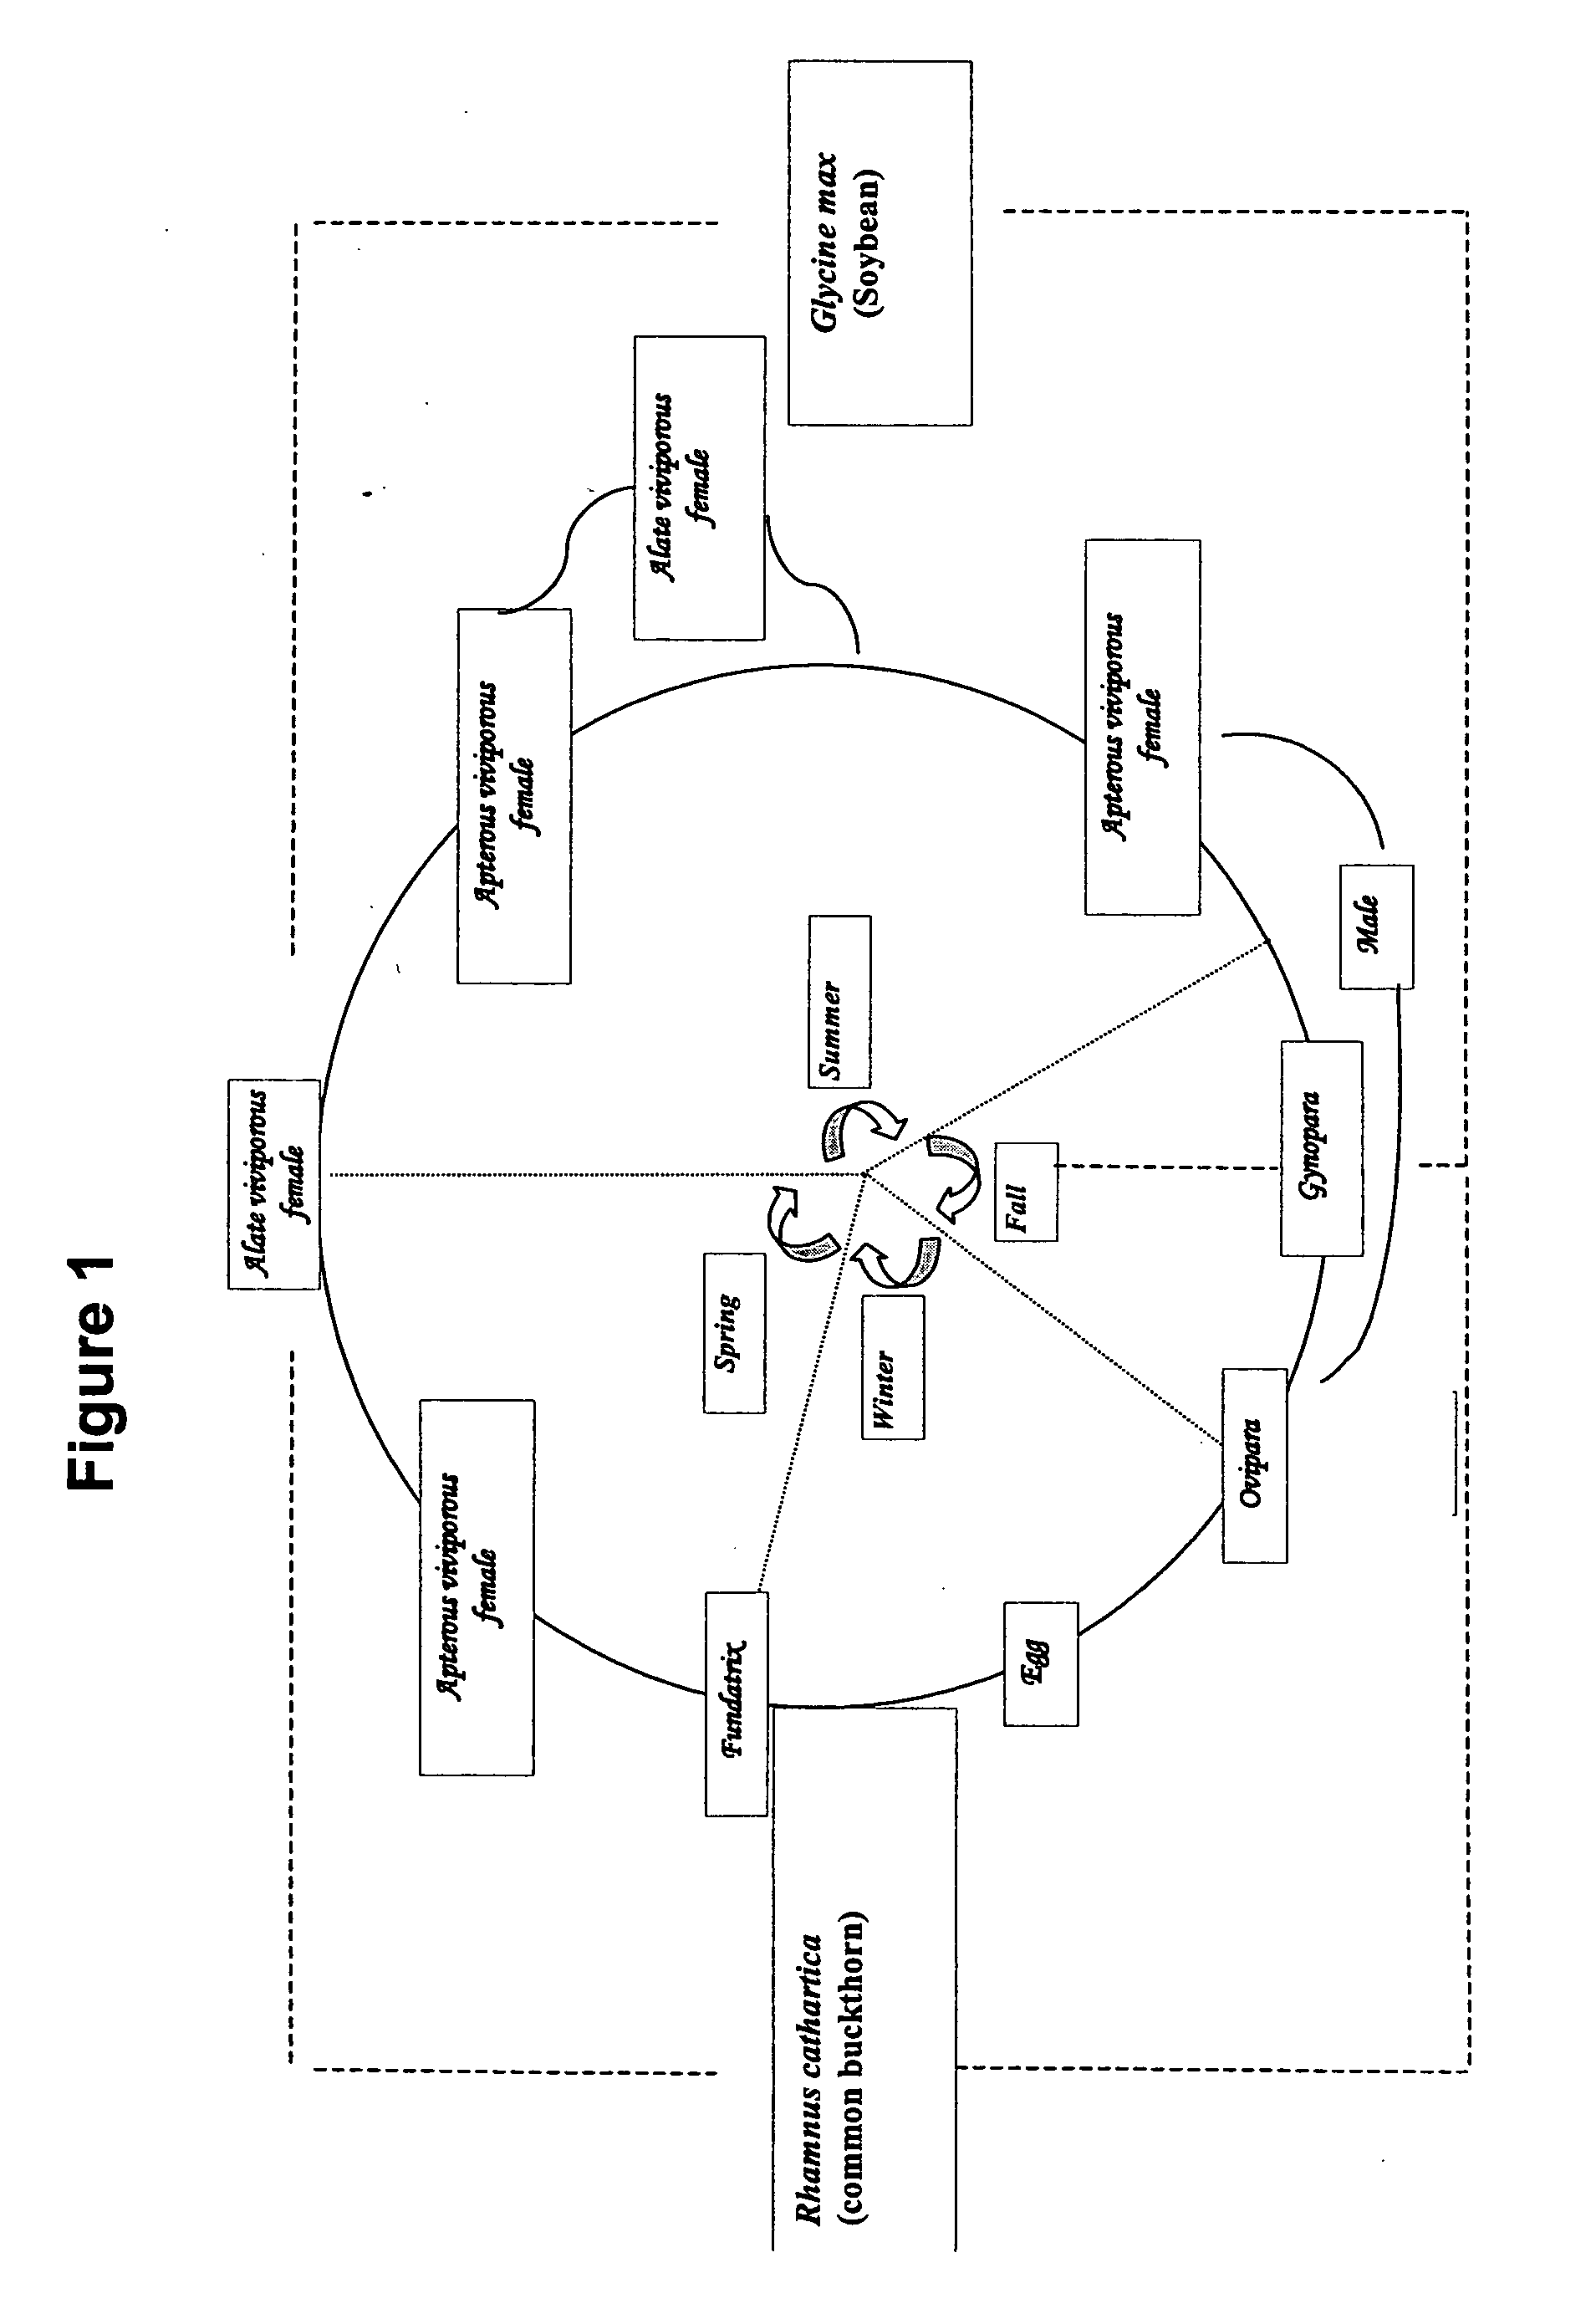 Method for soybean aphid population suppression and monitoring using aphid-and host-plant-associated semiochemical compositions